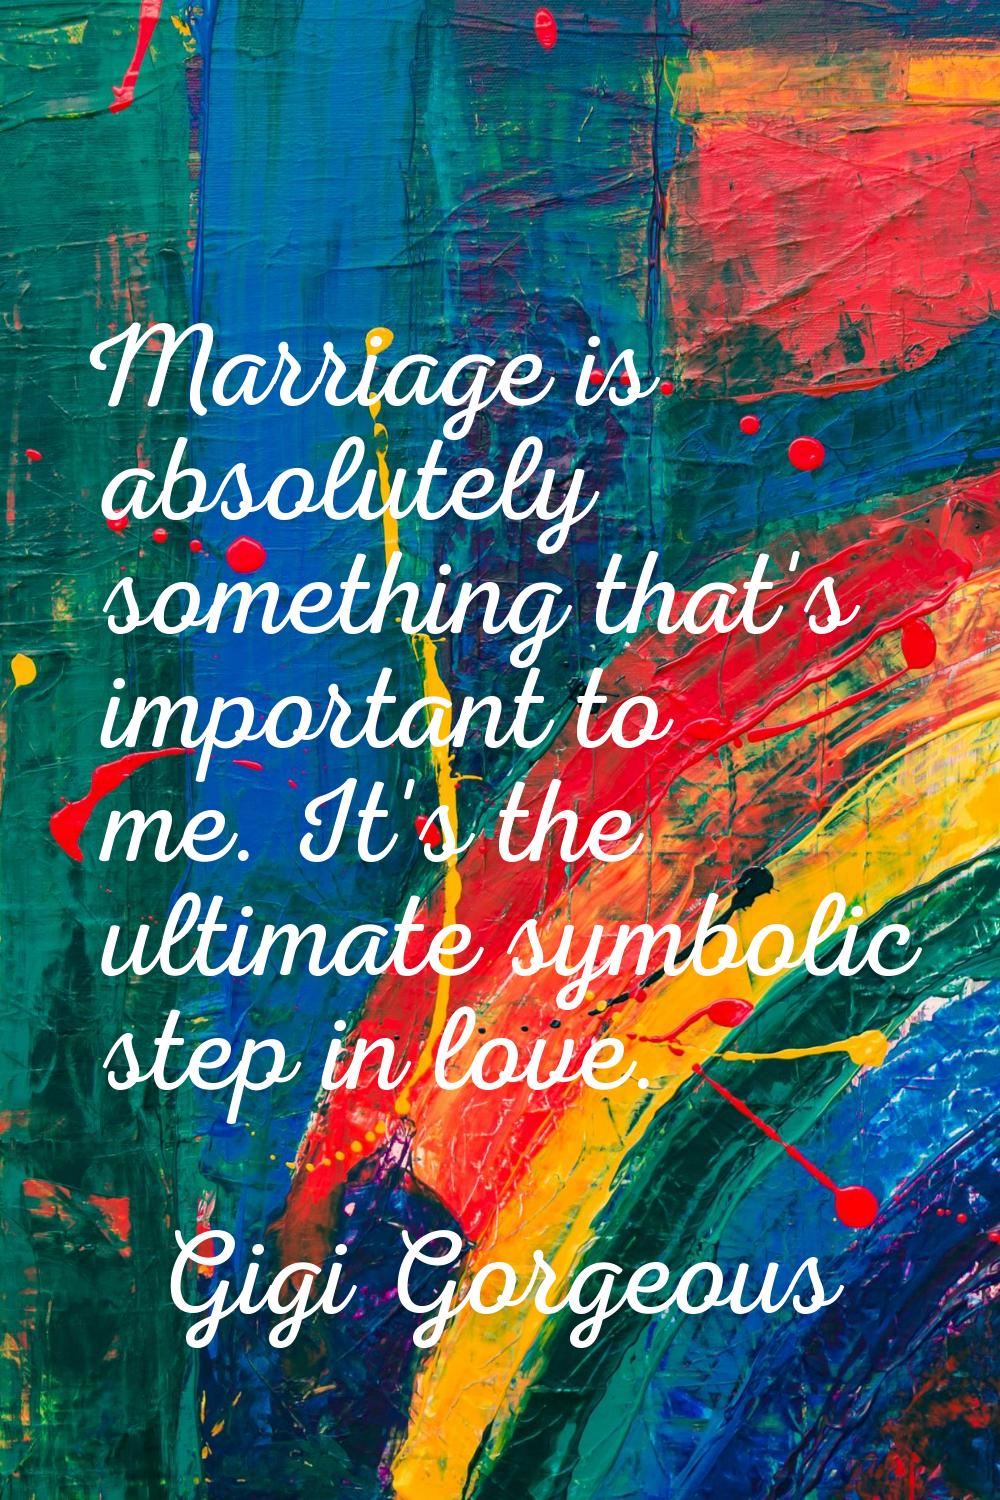 Marriage is absolutely something that's important to me. It's the ultimate symbolic step in love.